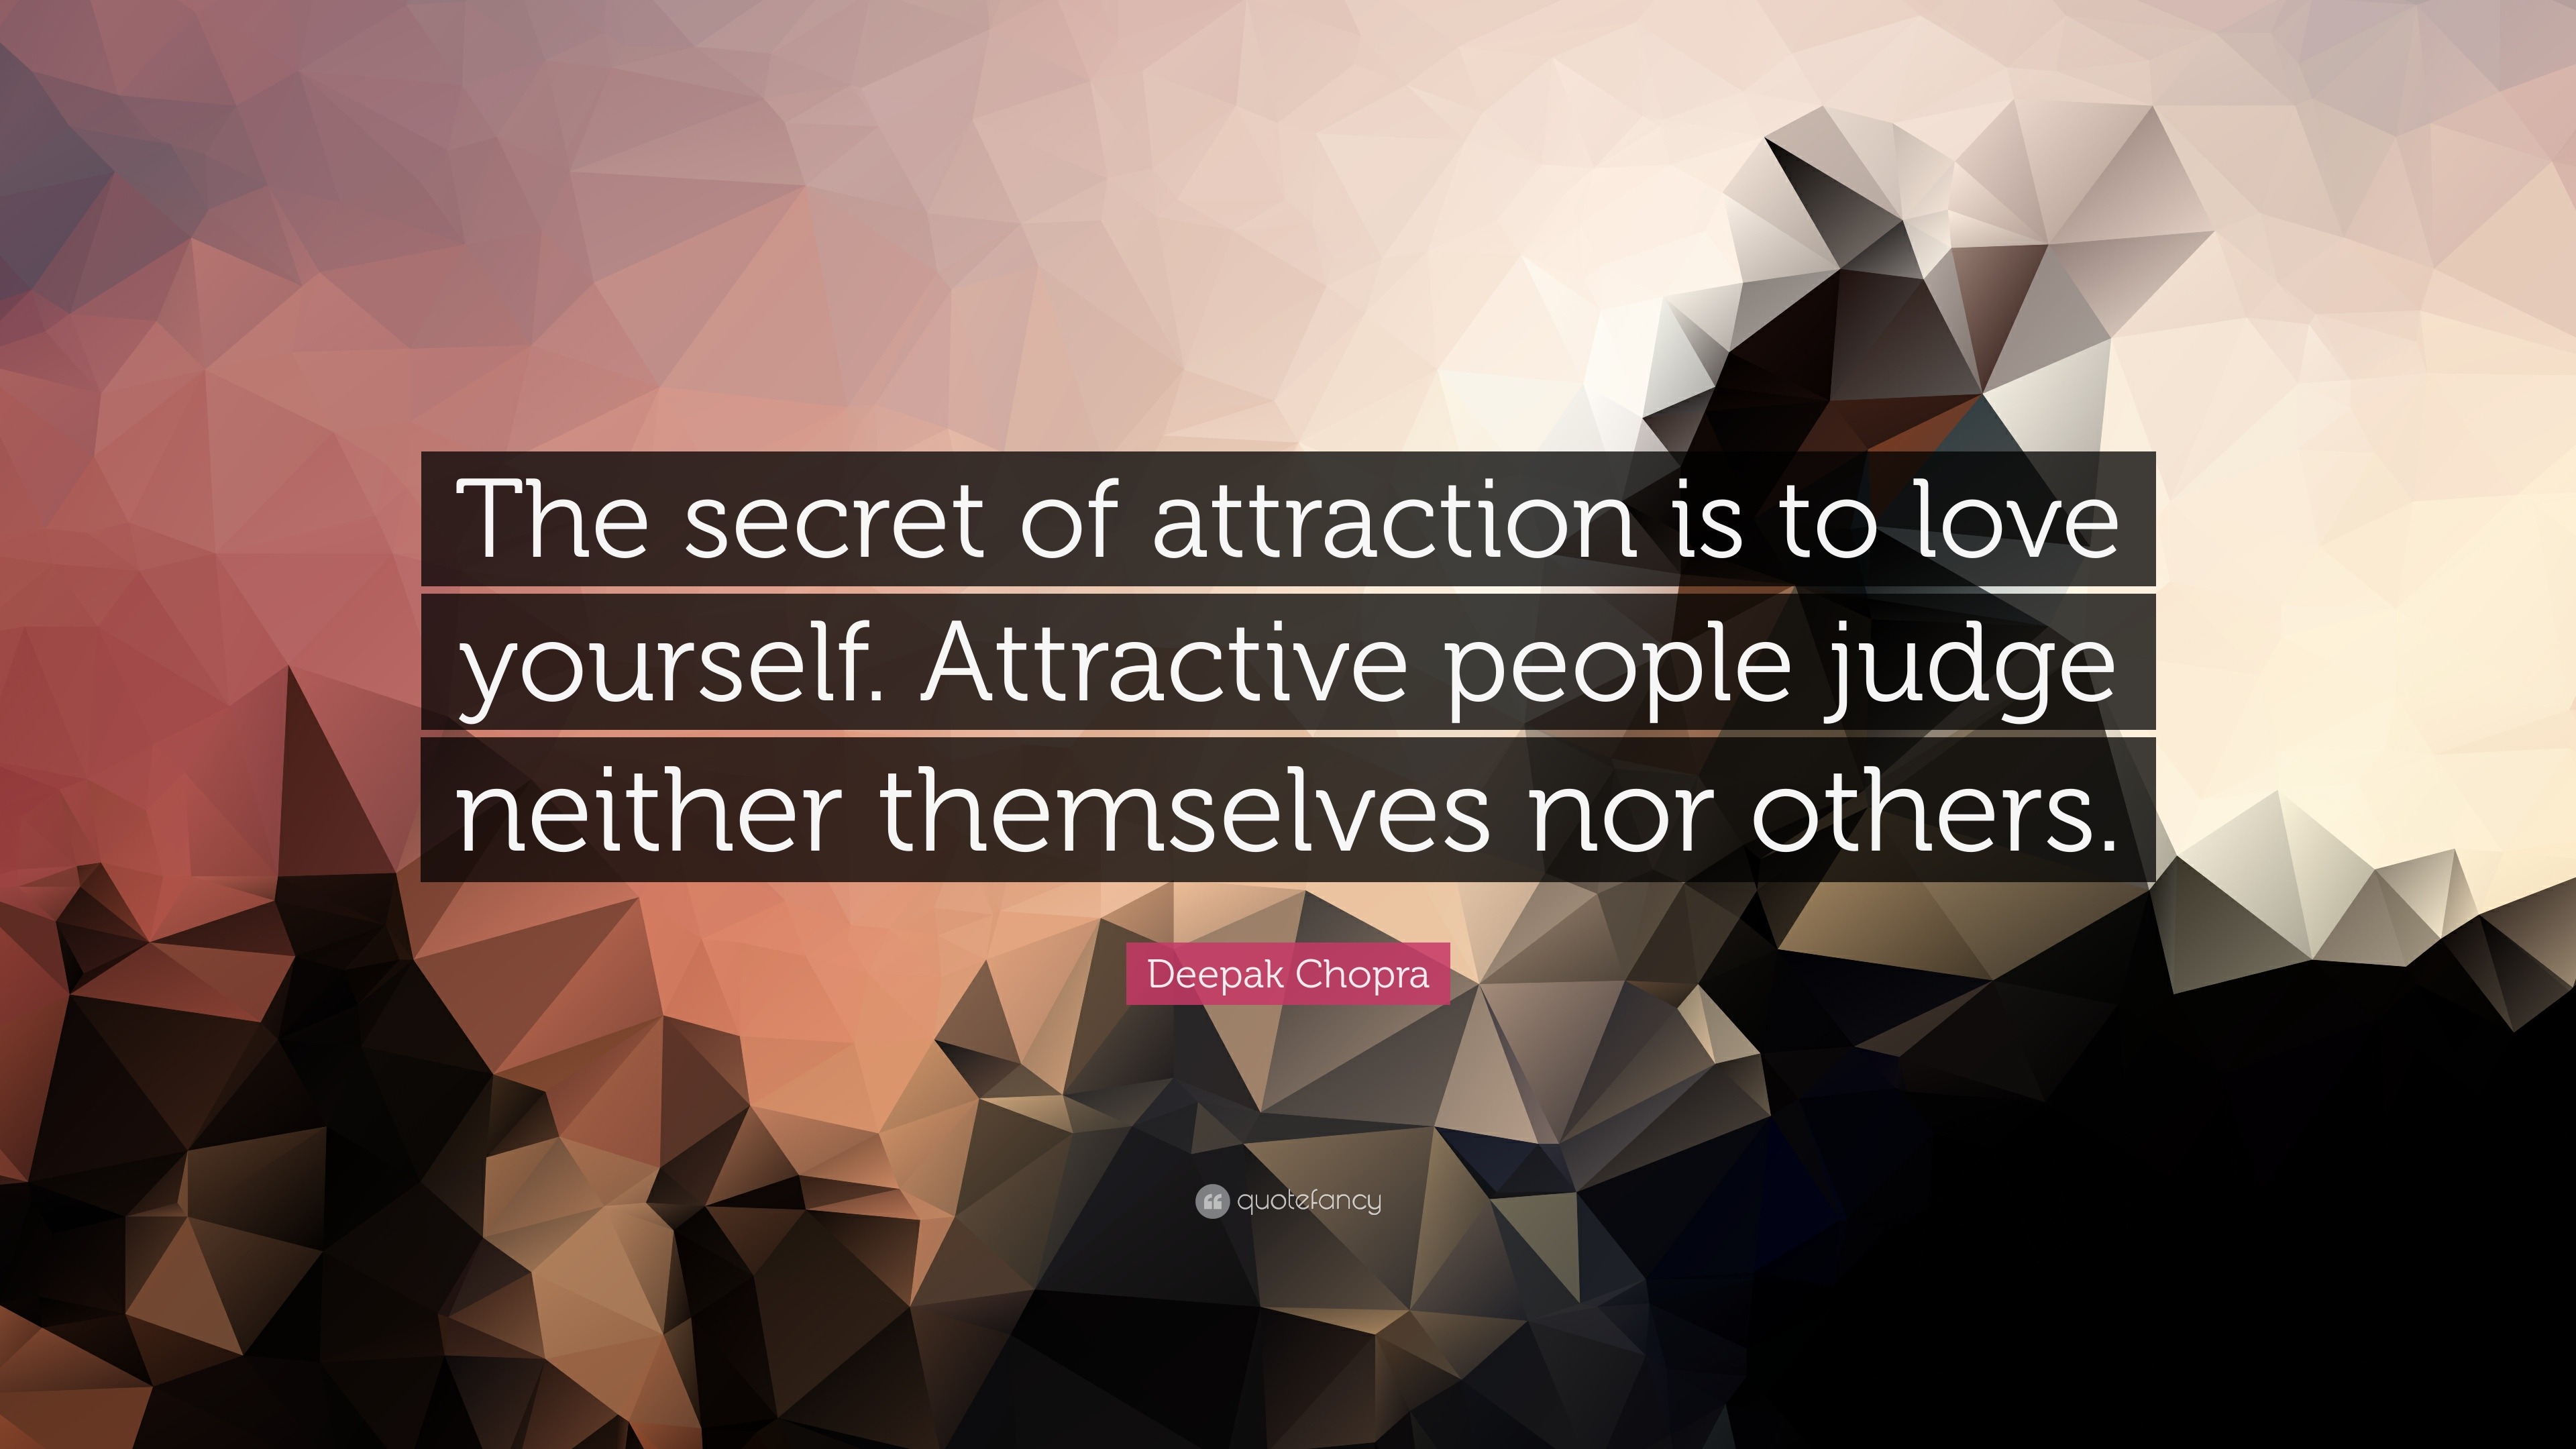 Judging Quotes “The secret of attraction is to love yourself Attractive people judge